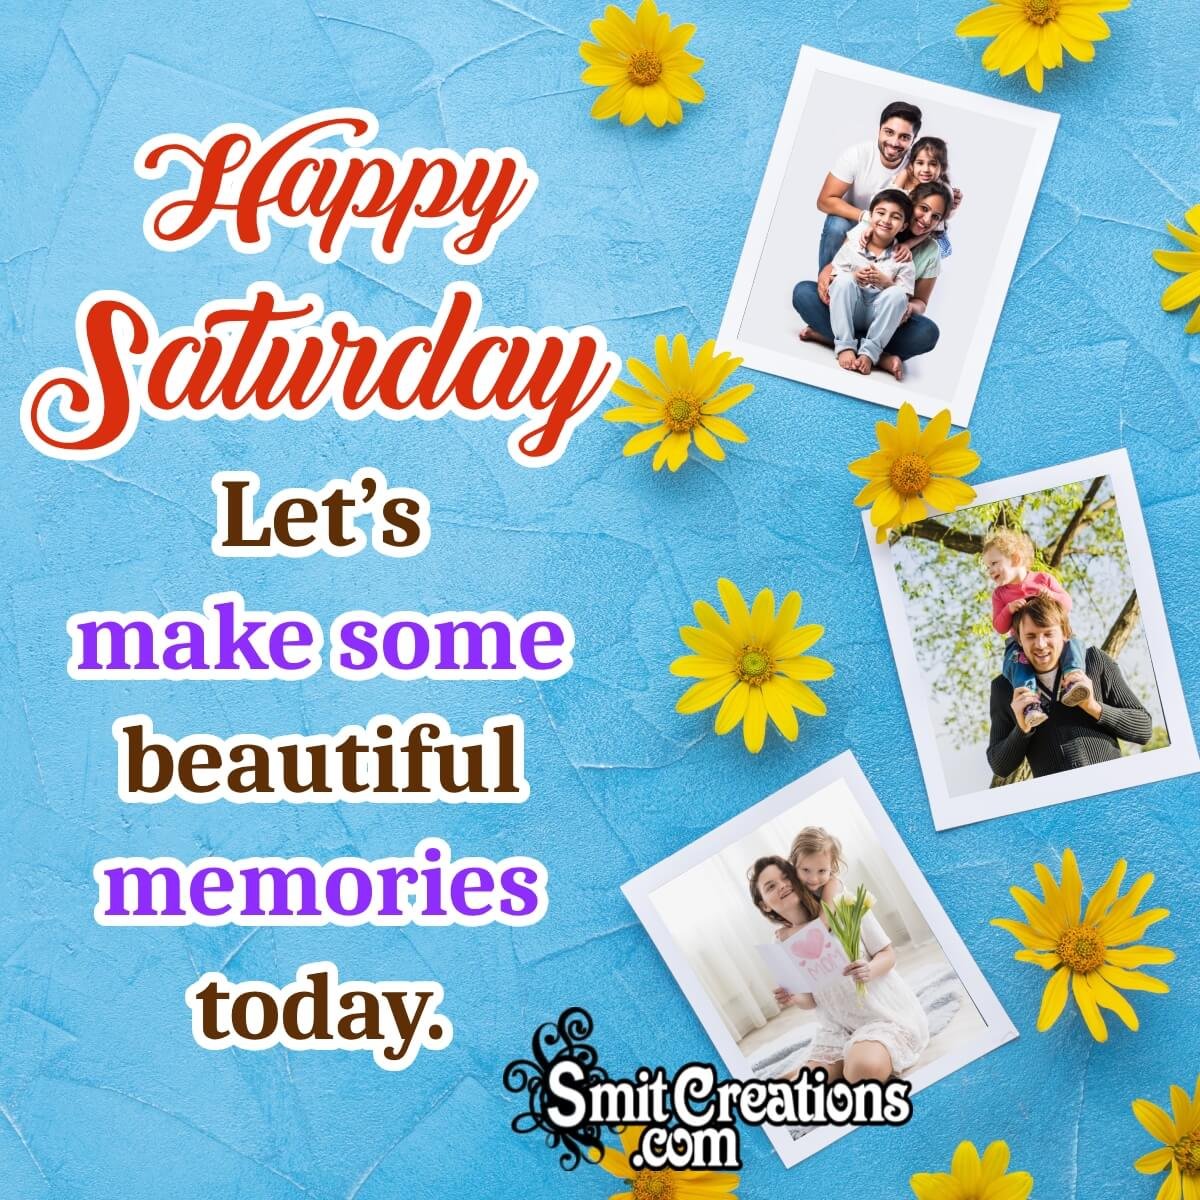 45 Good Morning Happy Saturday Images - Smit Creations – Your Daily ...